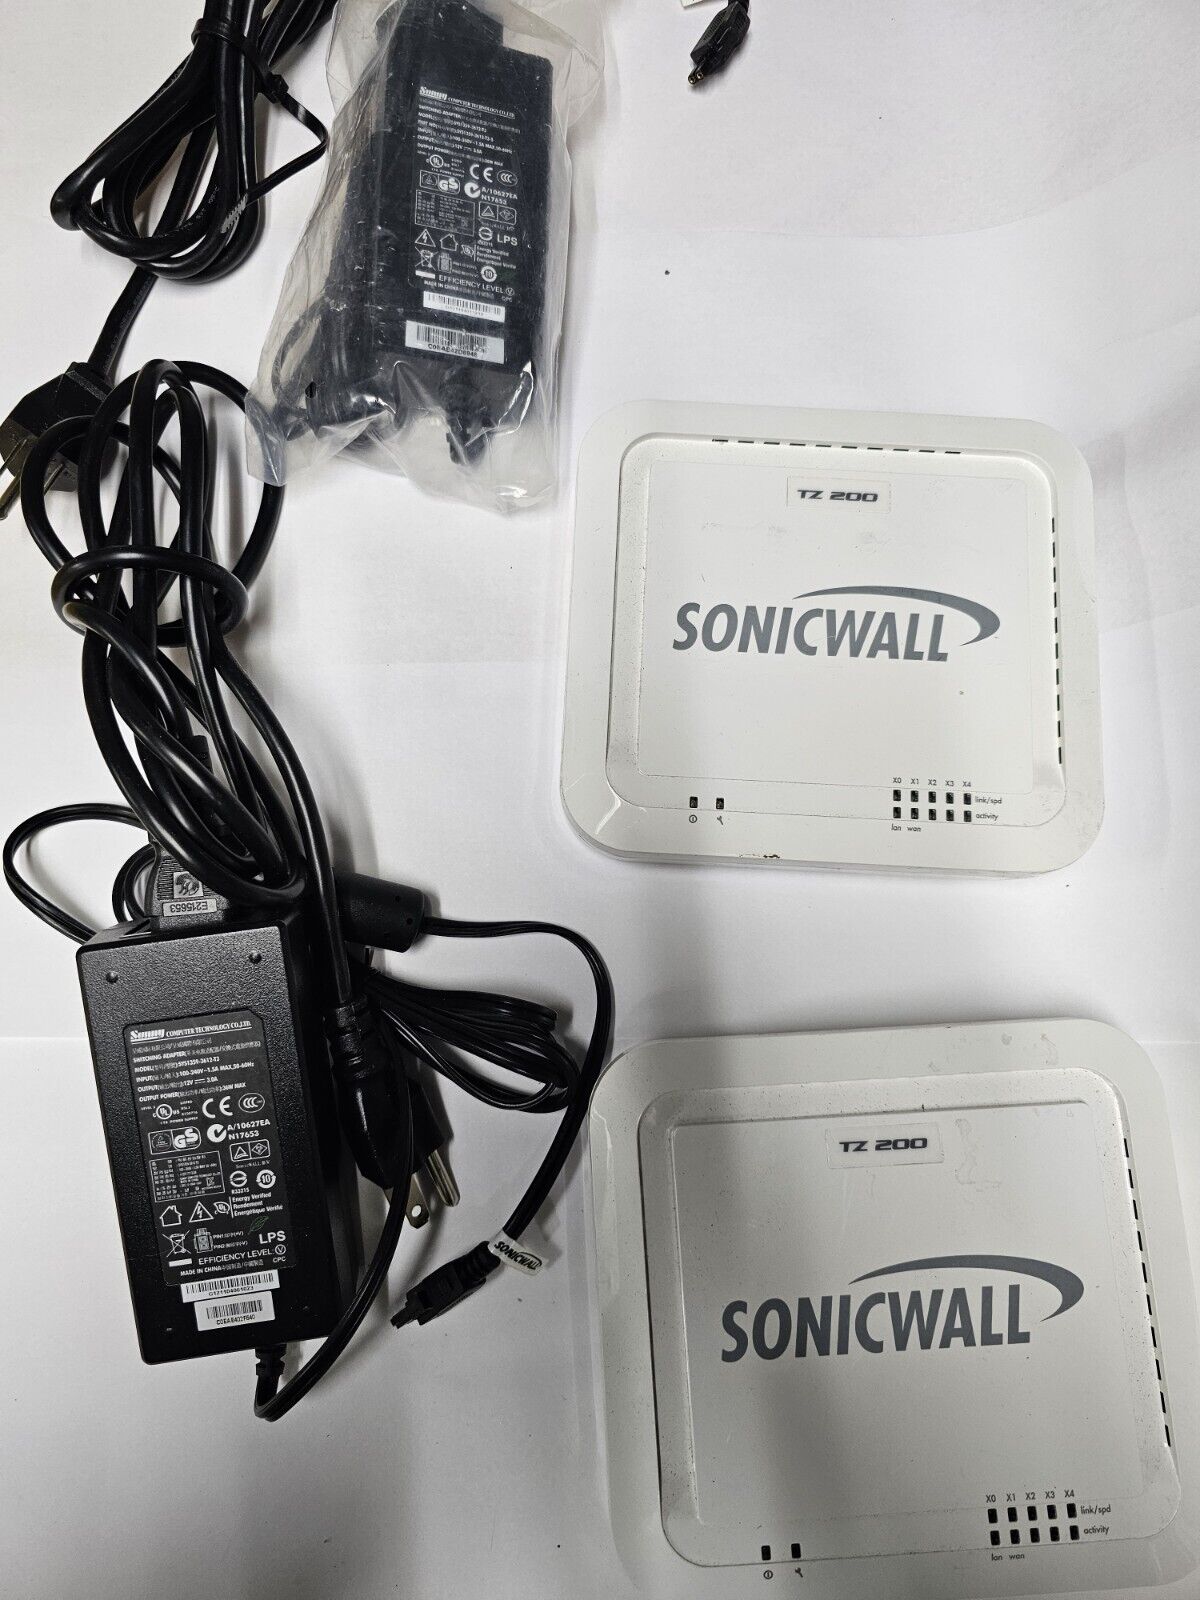 (2) Sonicwall TZ 200 Network Firewall Router L24-37 Tested and working.